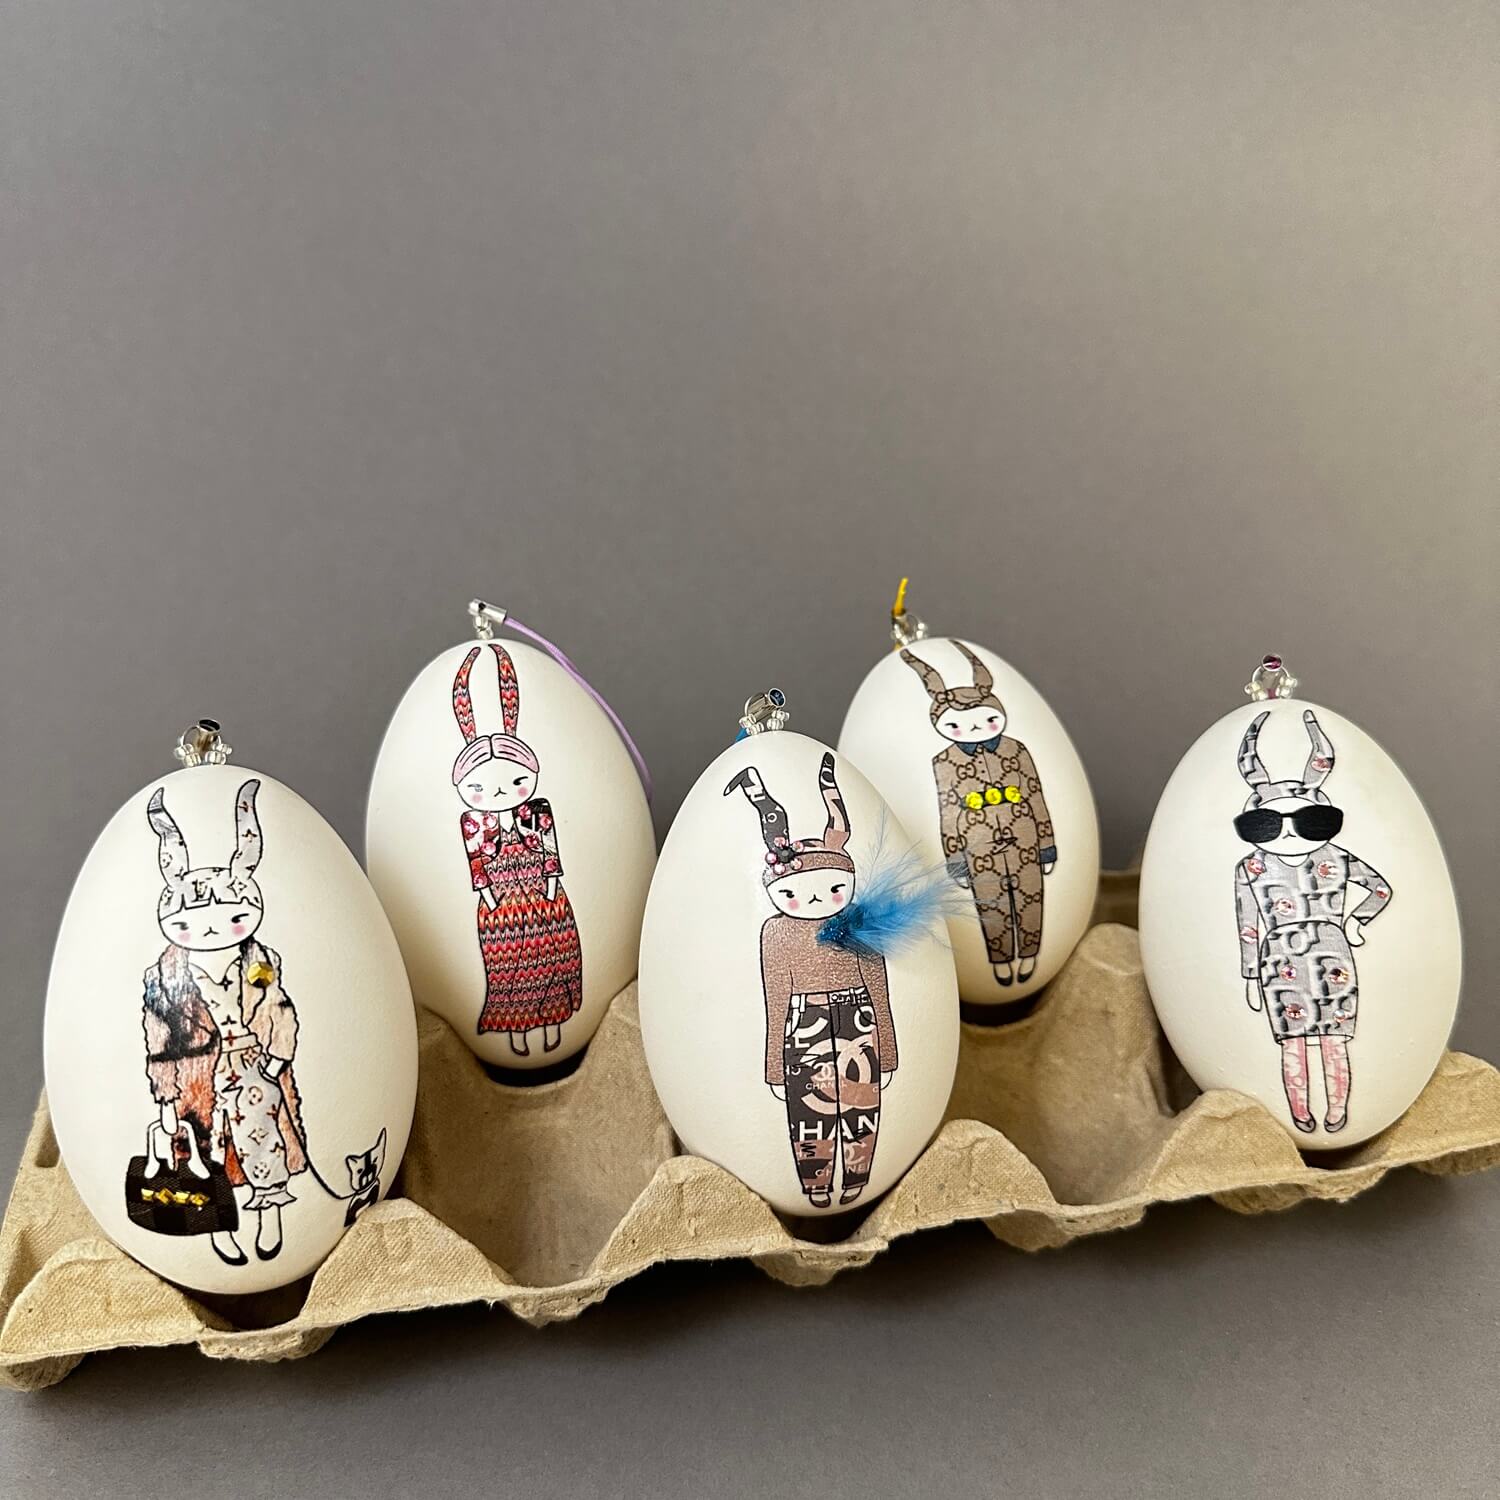 Fashion eggs, mixed pastels: set of 5 goose eggs with hanging